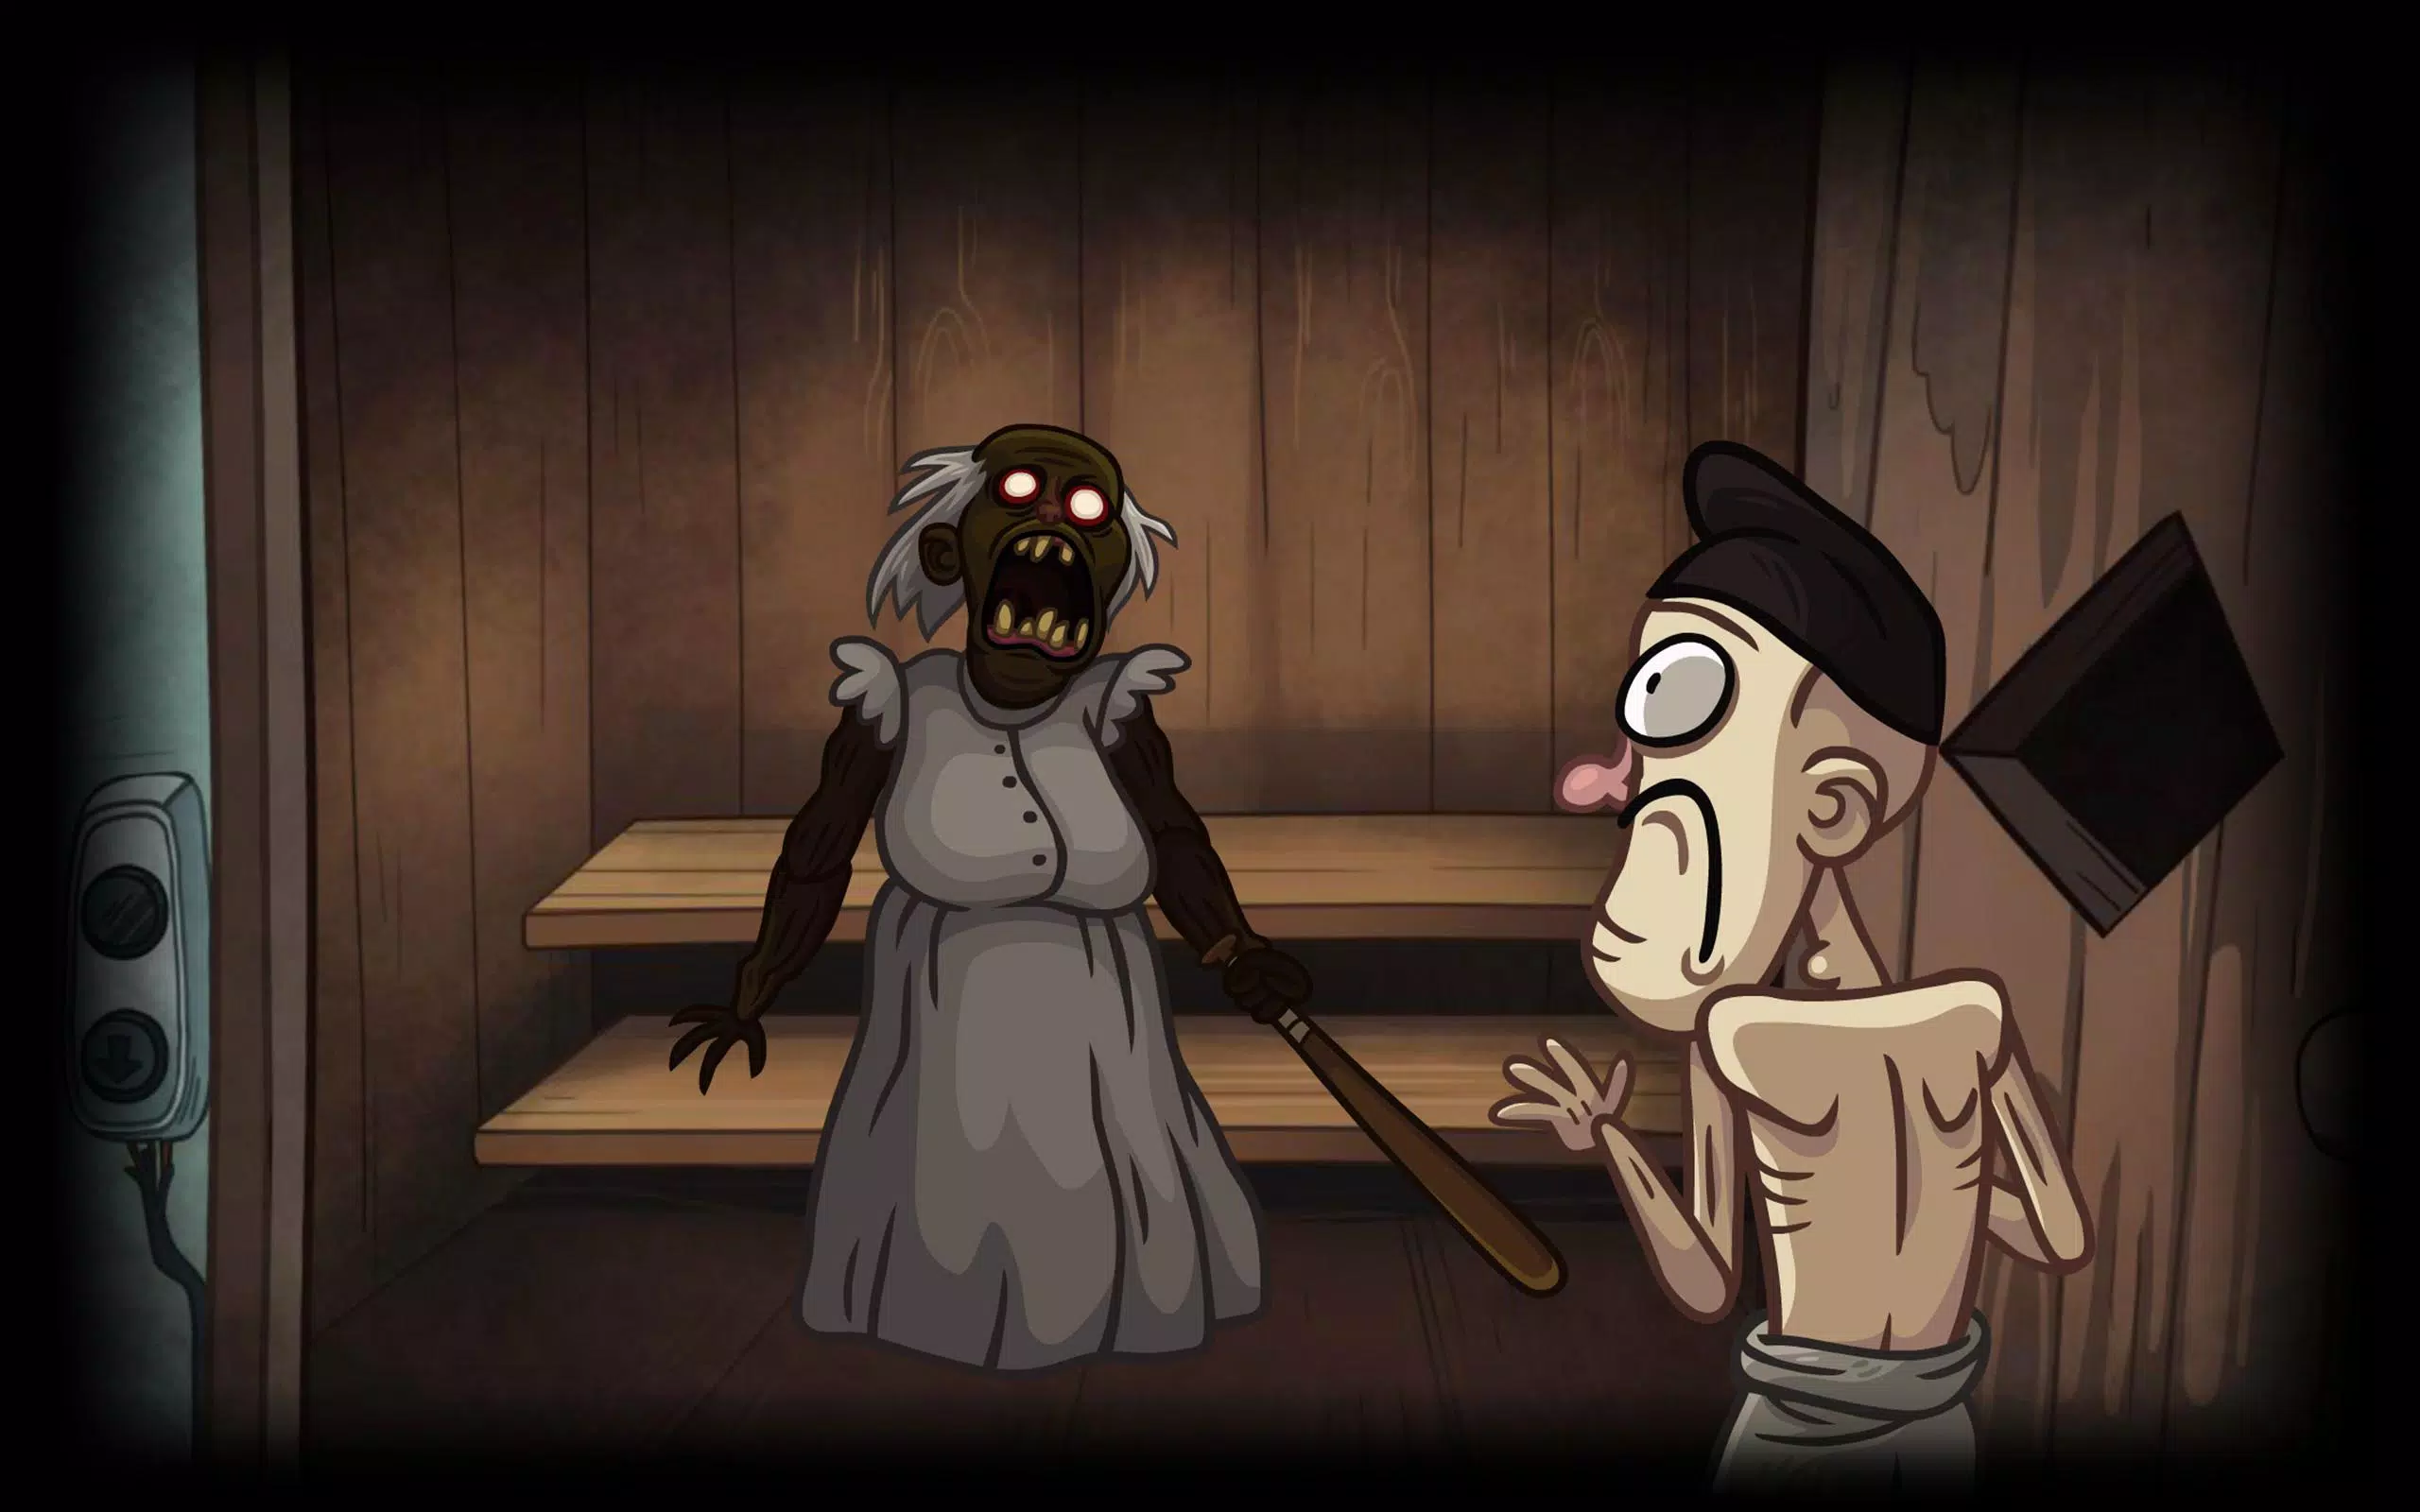 Troll Face Quest: Horror 3 APK para Android - Download